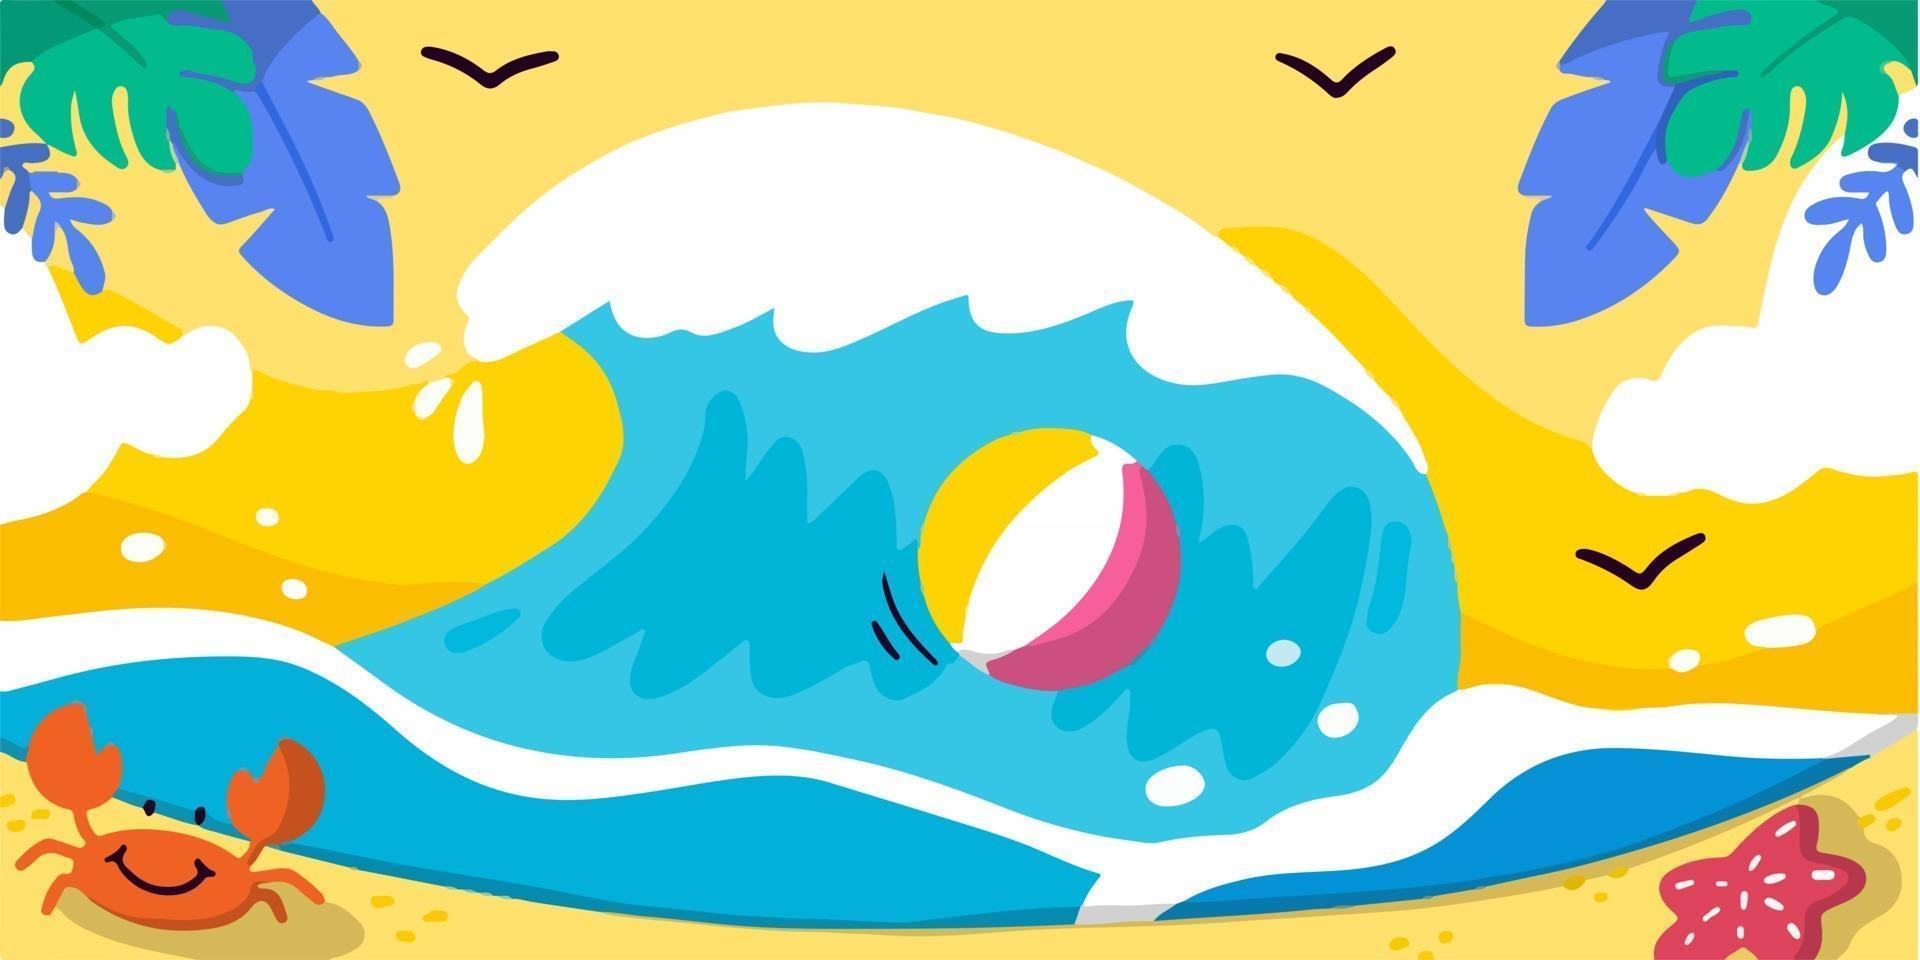 Cool Fun Beach And Waves Doodle Illustration vector